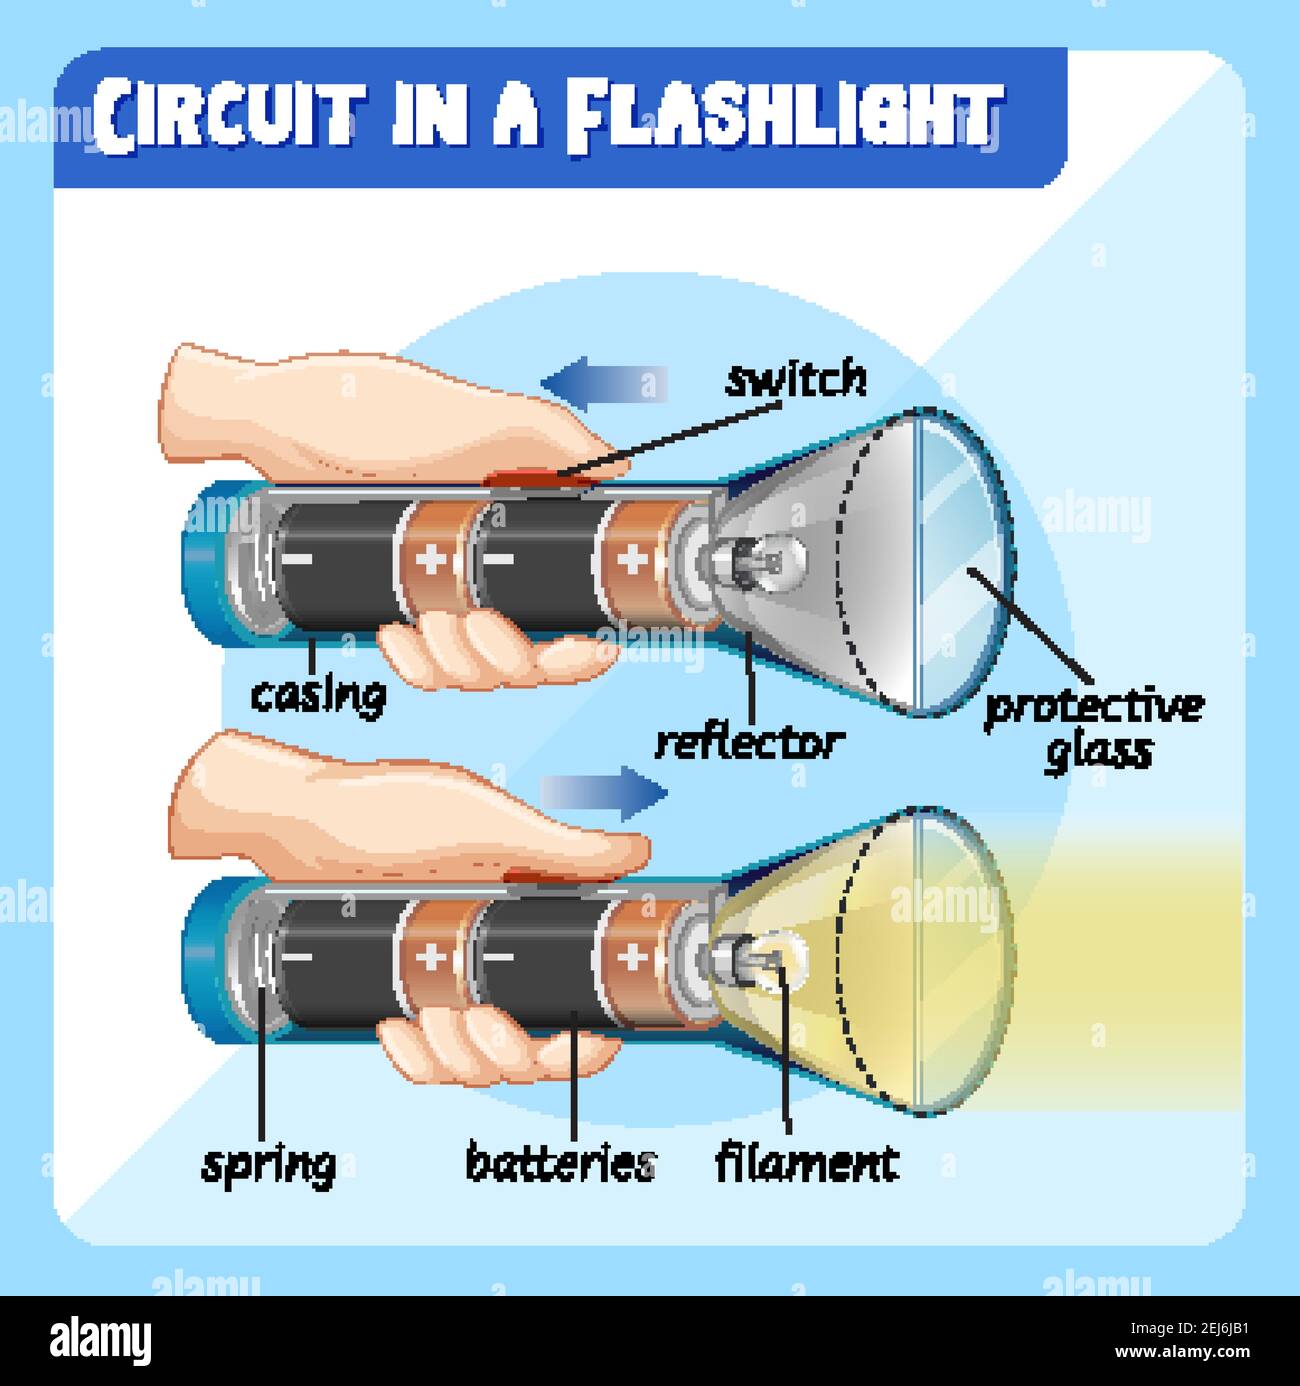 Diagram showing circuit in a flashlight illustration Stock Vector